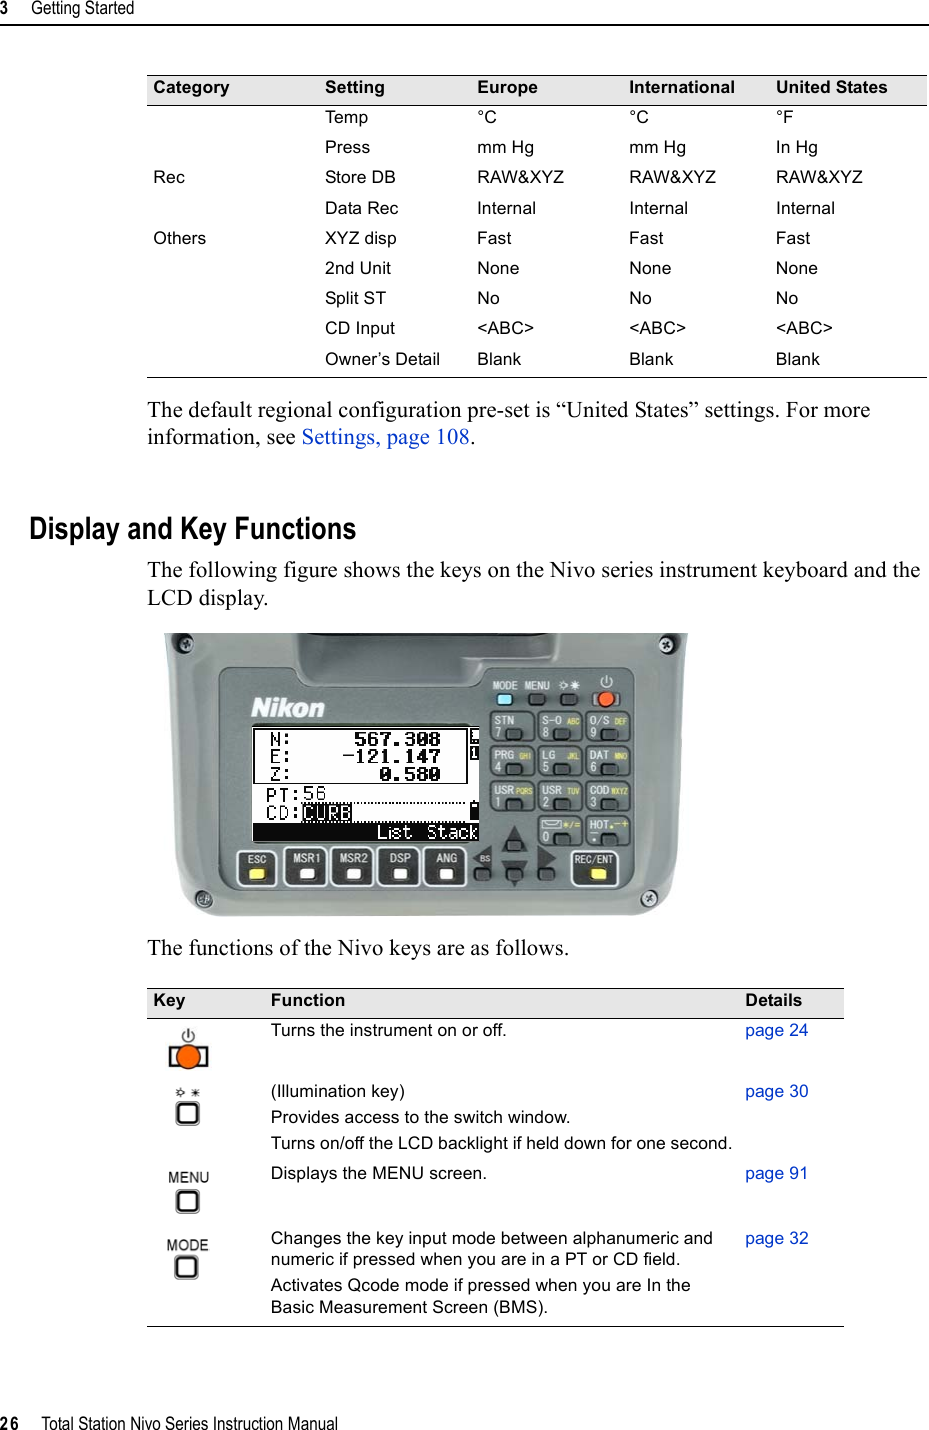 3     Getting Started26     Total Station Nivo Series Instruction ManualThe default regional configuration pre-set is “United States” settings. For more information, see Settings, page 108.Display and Key FunctionsThe following figure shows the keys on the Nivo series instrument keyboard and the LCD display. The functions of the Nivo keys are as follows.Temp °C °C °FPress mm Hg mm Hg In HgRec Store DB RAW&amp;XYZ RAW&amp;XYZ RAW&amp;XYZData Rec Internal Internal InternalOthers XYZ disp Fast Fast Fast2nd Unit None None NoneSplit ST No No NoCD Input &lt;ABC&gt; &lt;ABC&gt; &lt;ABC&gt;Owner’s Detail Blank Blank BlankKey Function DetailsTurns the instrument on or off. page 24(Illumination key)Provides access to the switch window.Turns on/off the LCD backlight if held down for one second.page 30Displays the MENU screen. page 91Changes the key input mode between alphanumeric and numeric if pressed when you are in a PT or CD field.Activates Qcode mode if pressed when you are In the Basic Measurement Screen (BMS).page 32Category Setting Europe International United States